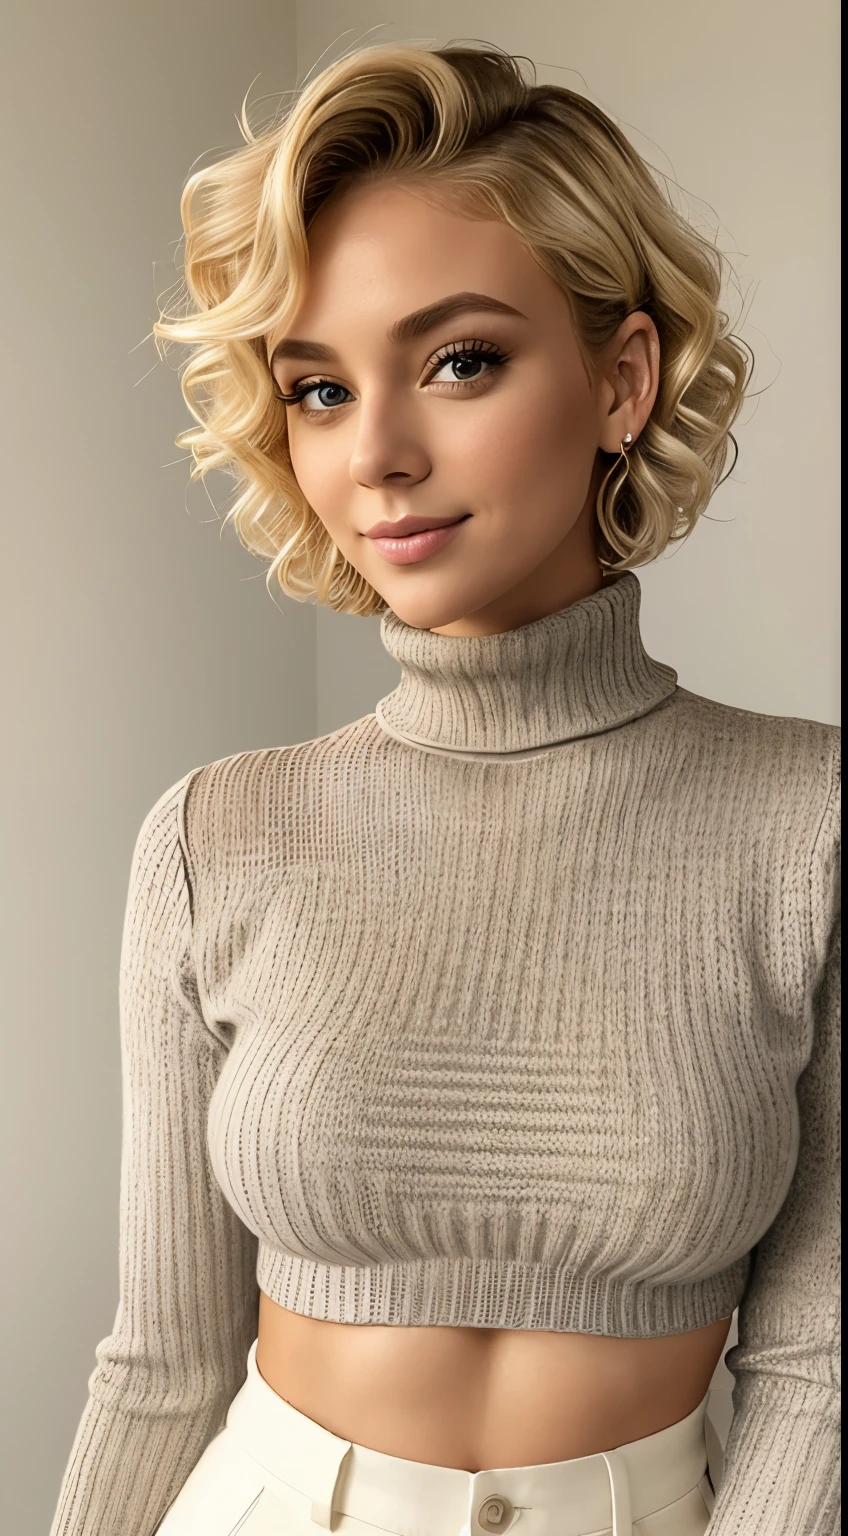 Beautiful arafed Girl 25 years old, blond short curly hair, fine nice detaild face, black turtleneck  knitted tight sweather, brown eyes, long eyelashes, white trousers, lace bra